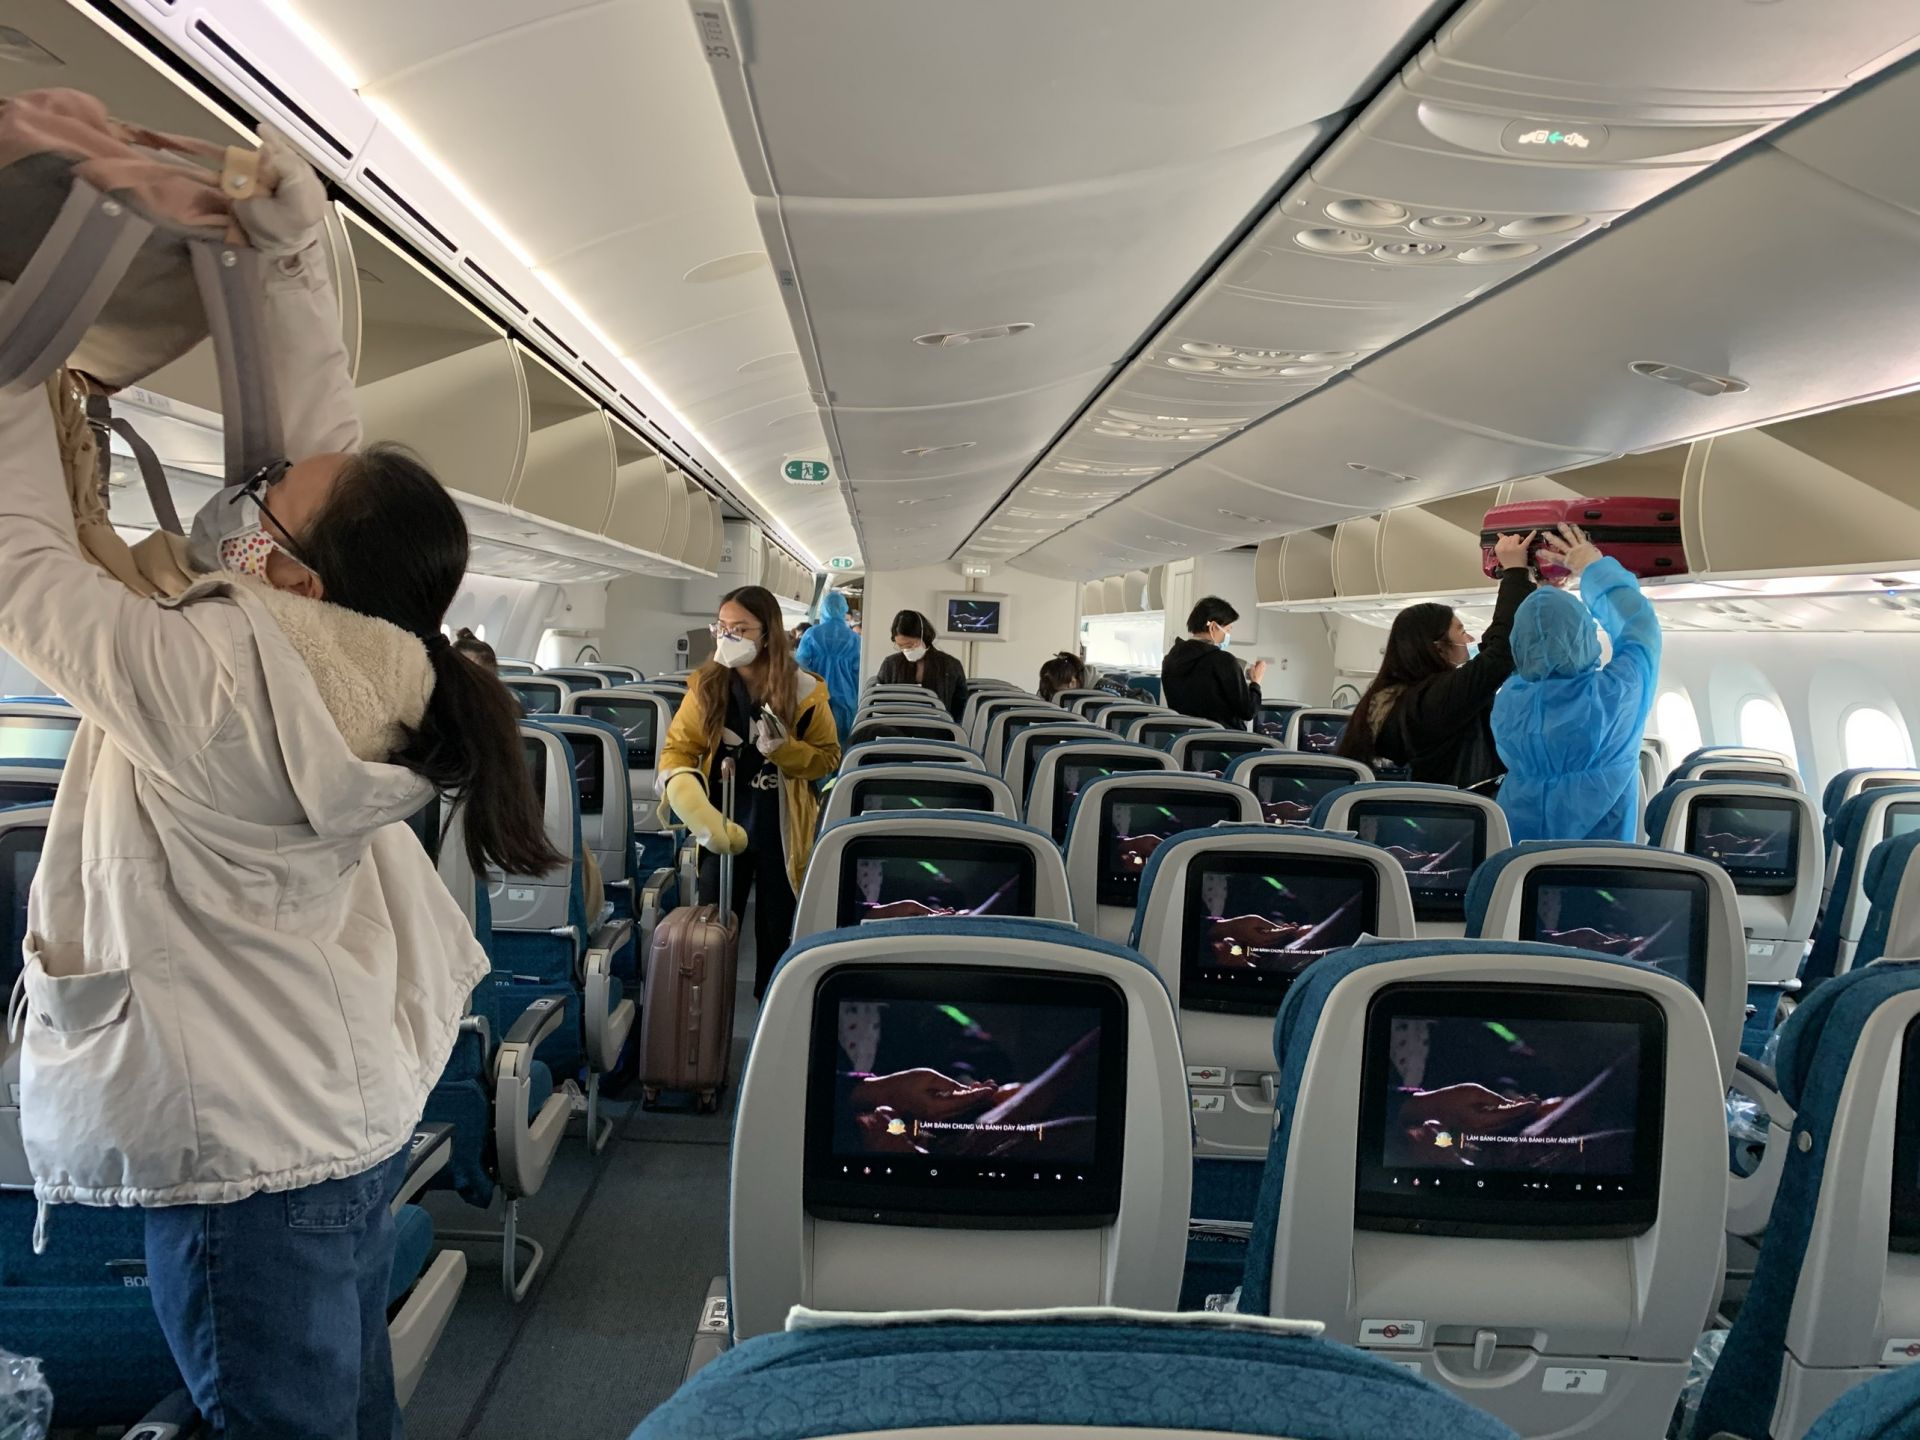 airlines allowed to operate at full capacity end seat distancing from 0000 on may 7